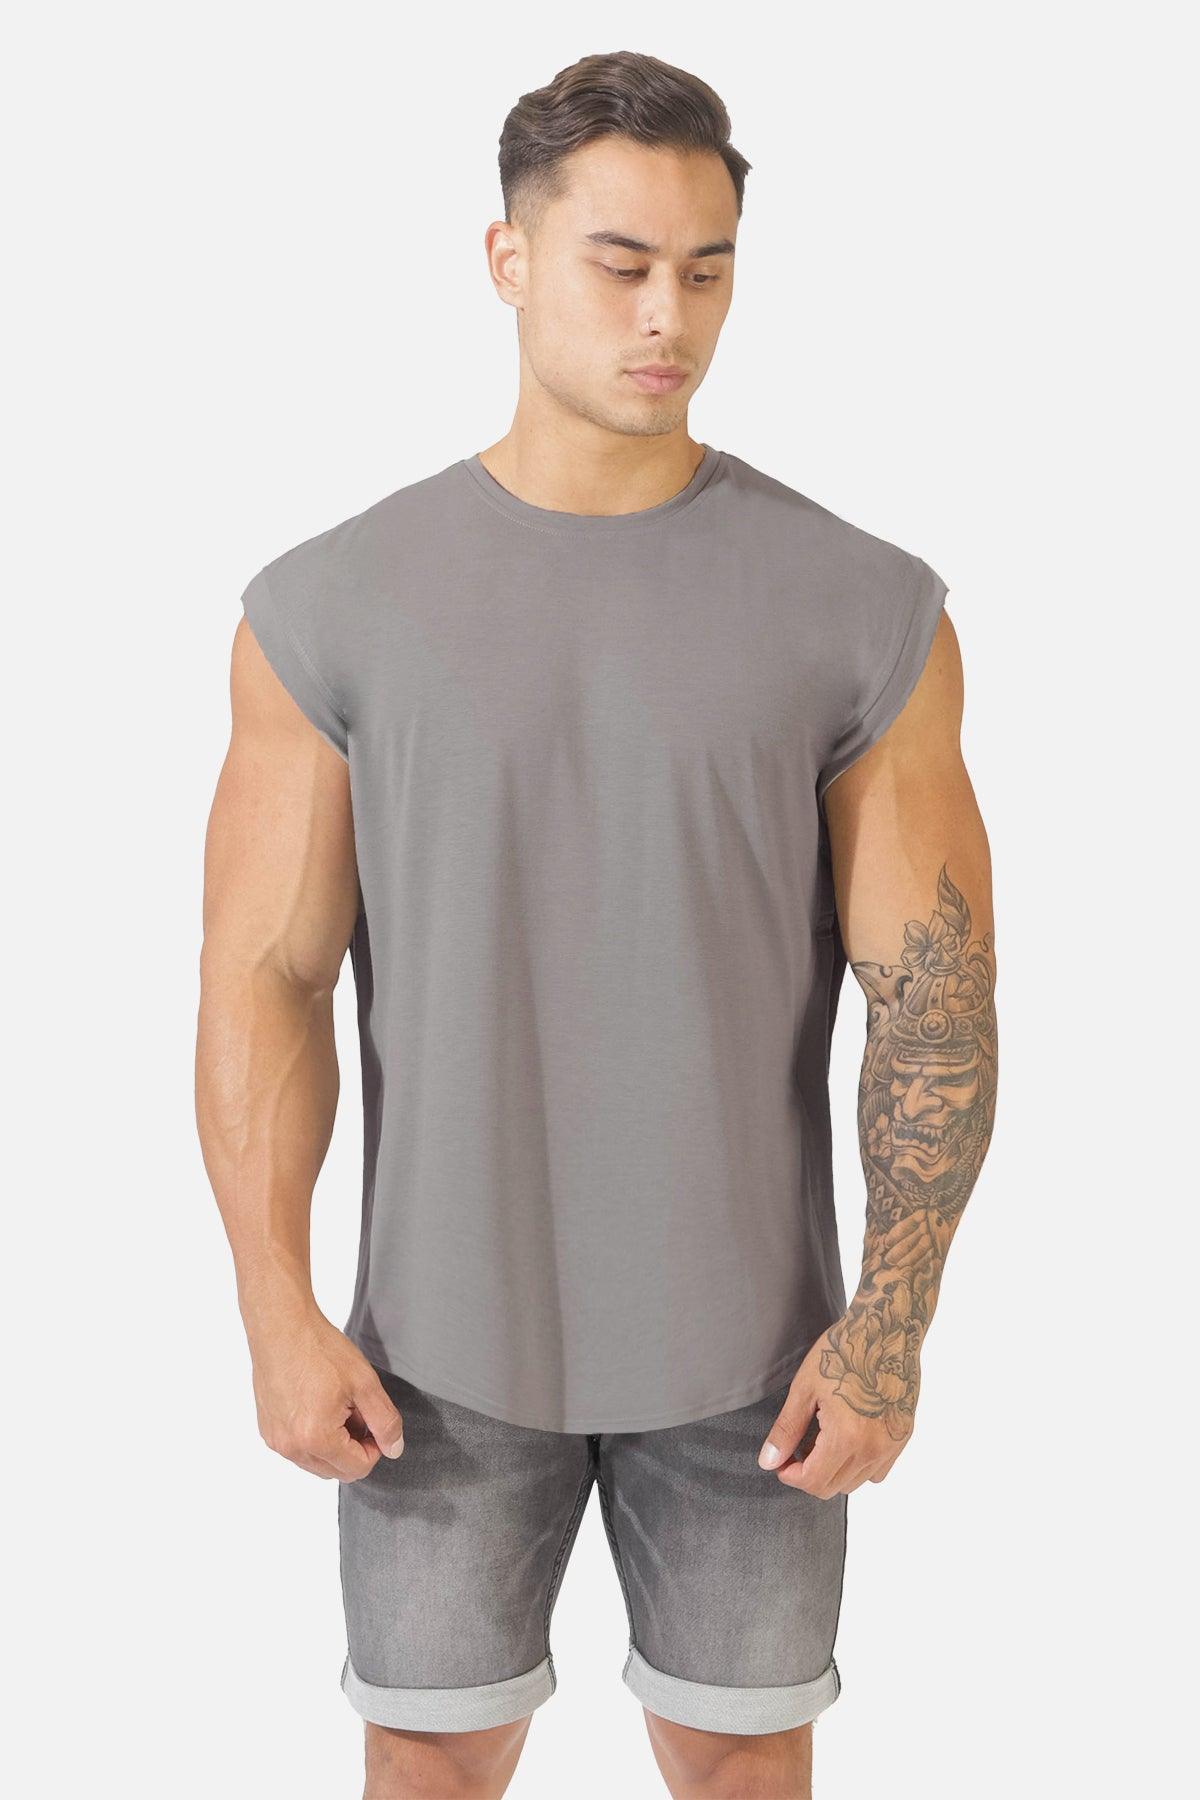 Capped Sleeve Muscle Tee - Light Gray